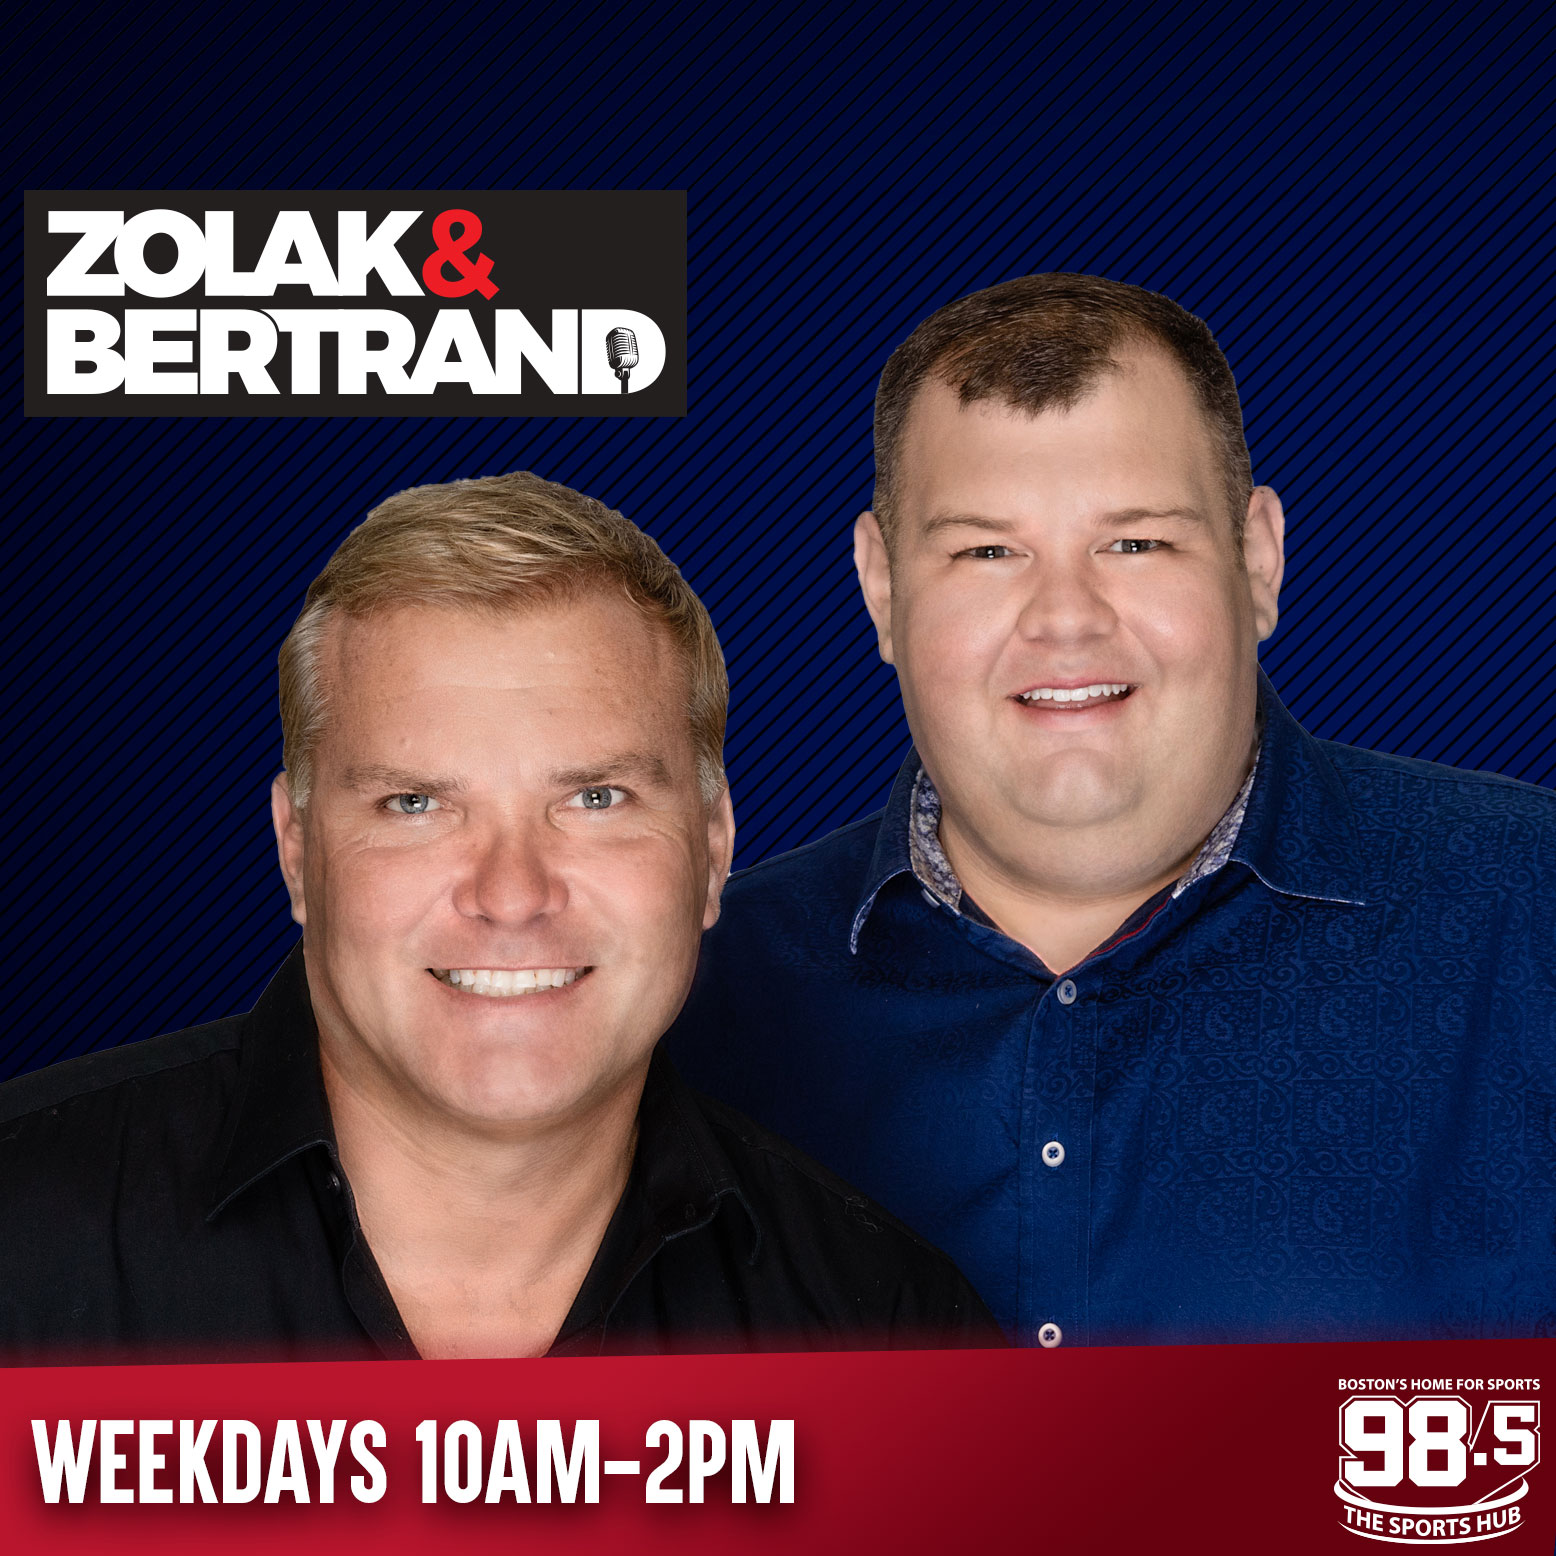 Zolak & Bertrand: Could the Patriots lose to the Jets?